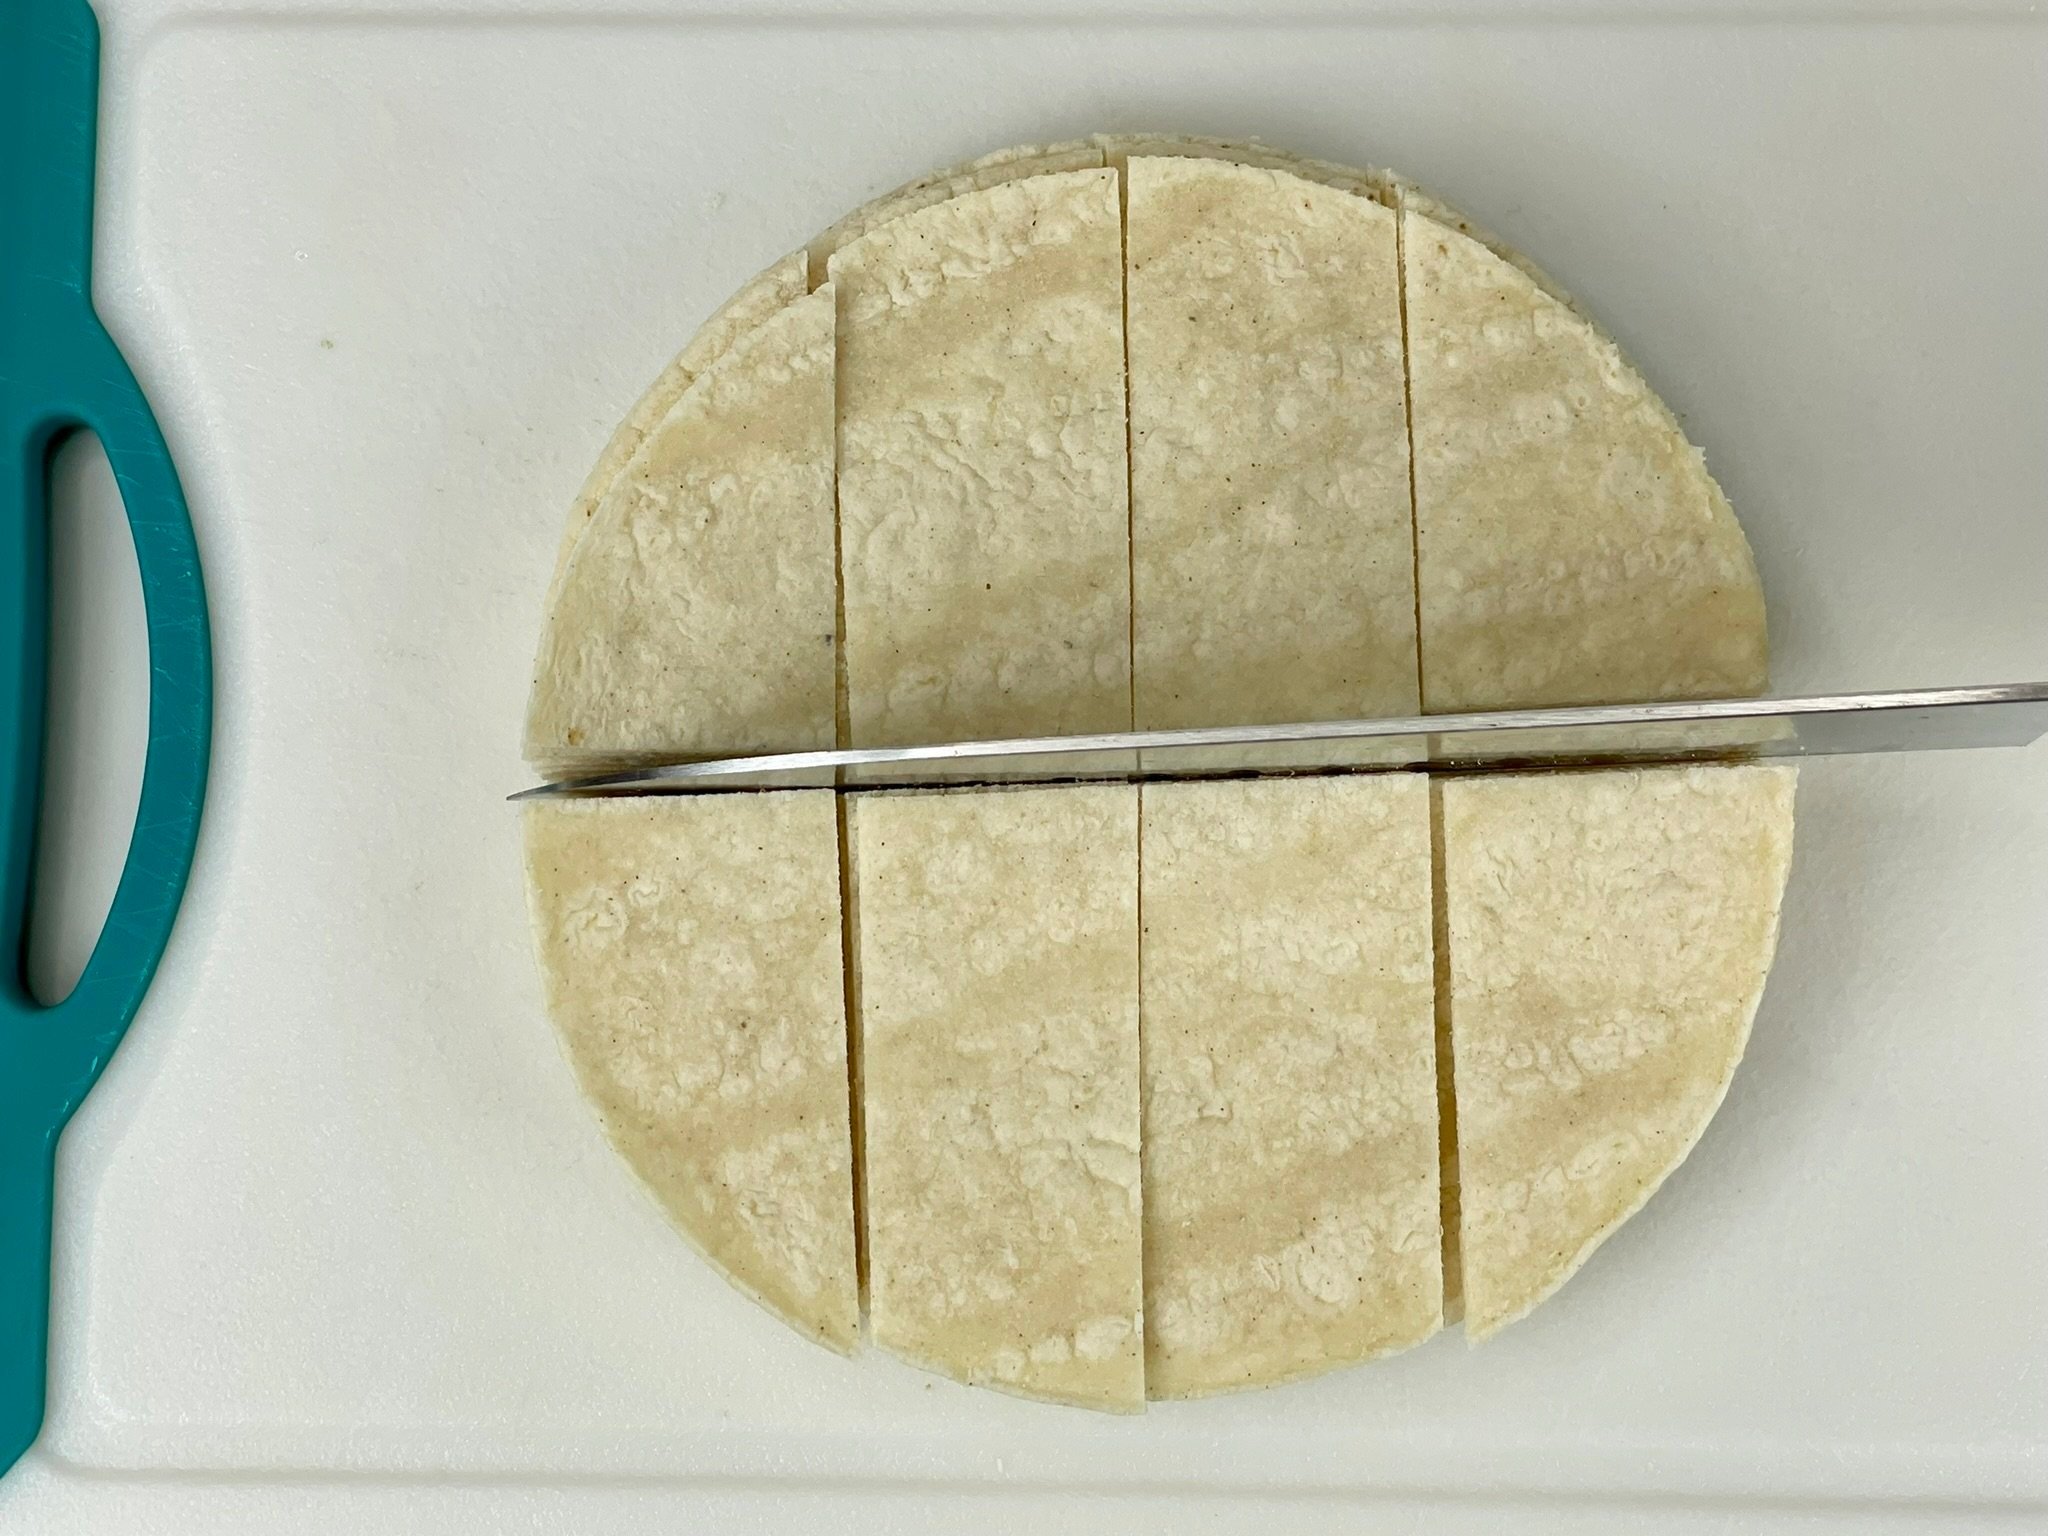 Slice into 8 sections.